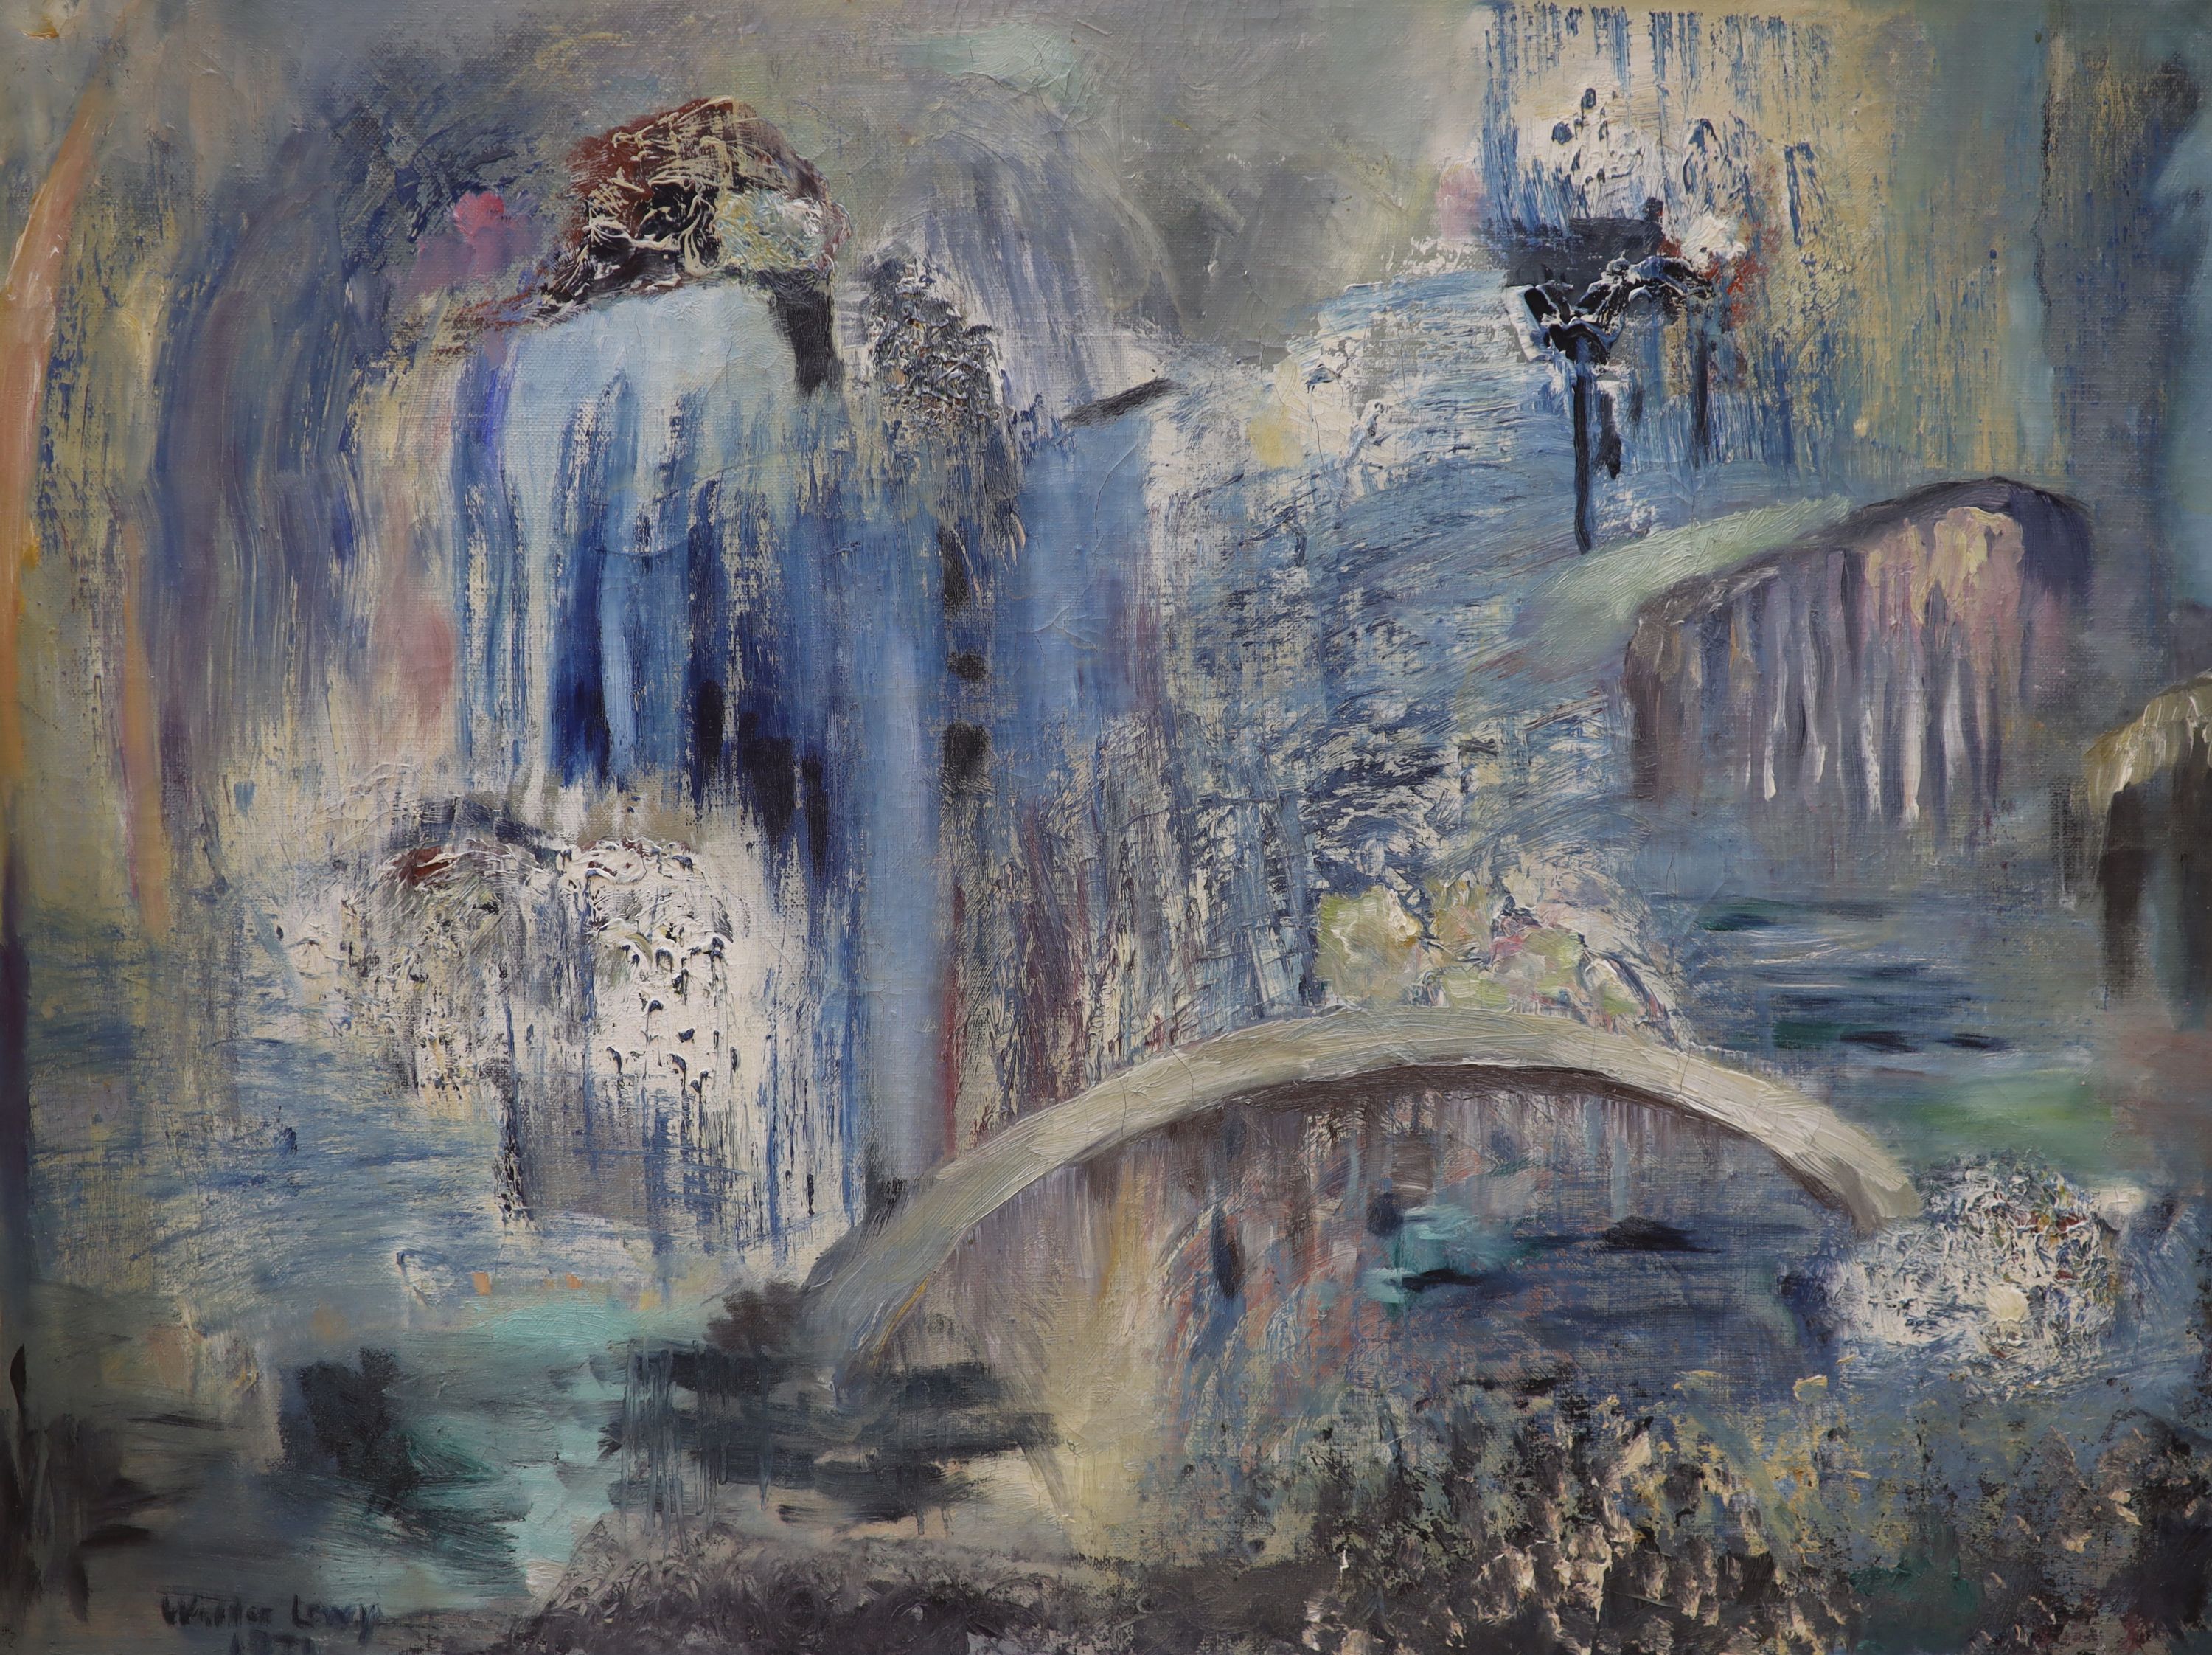 W. Lewy, oil on canvas, Abstract landscape, signed and dated 1971, 50 x 64cm